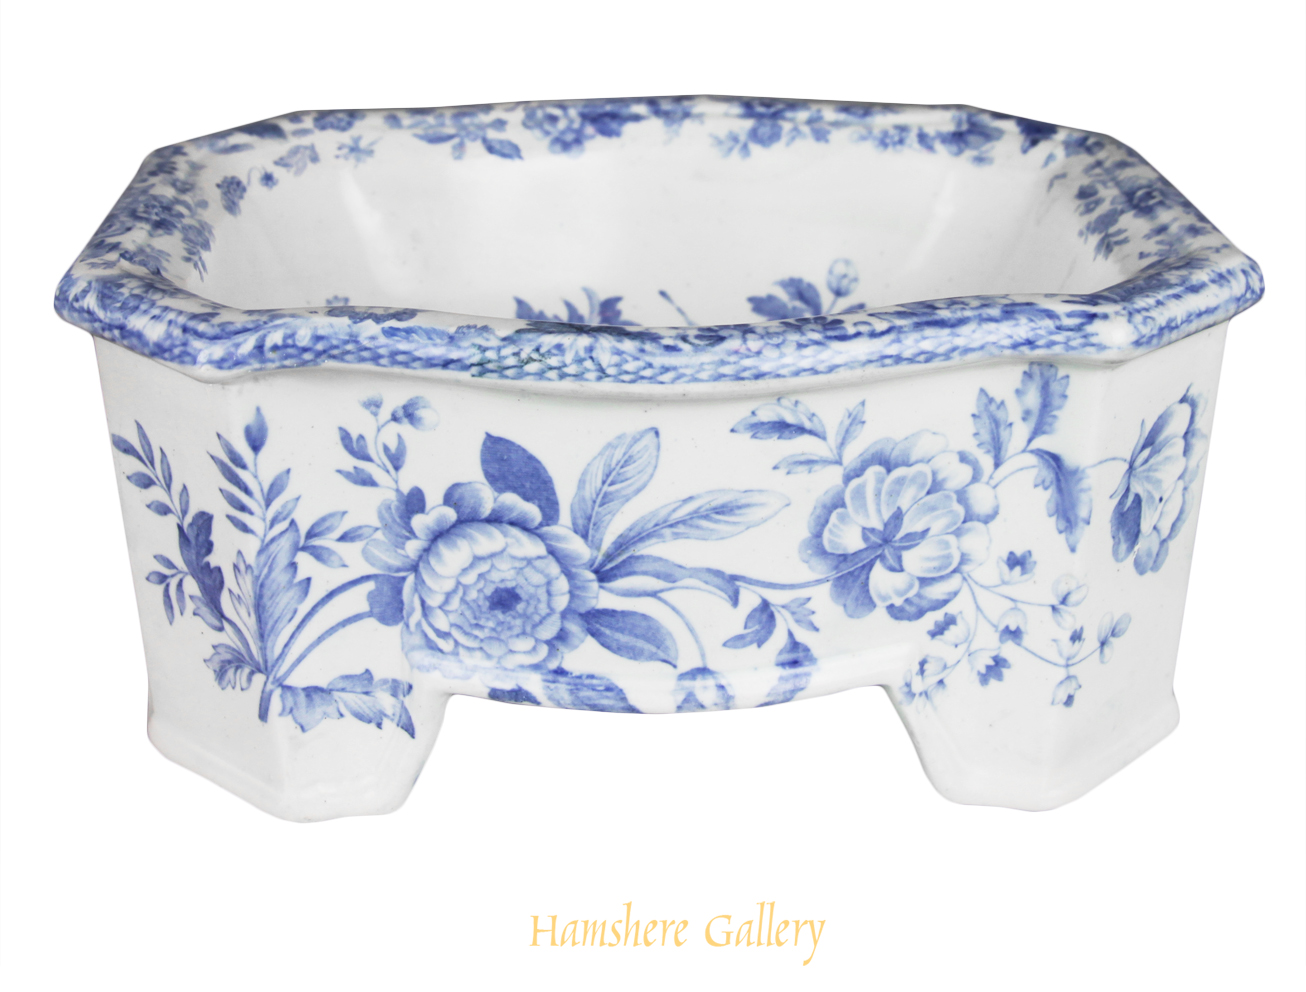 Click for larger image: A 19th century blue and white Spode / Copeland & Garett New Blanche “British Flowers” pattern dog bowl - A 19th century blue and white Spode / Copeland & Garett New Blanche “British Flowers” pattern dog bowl